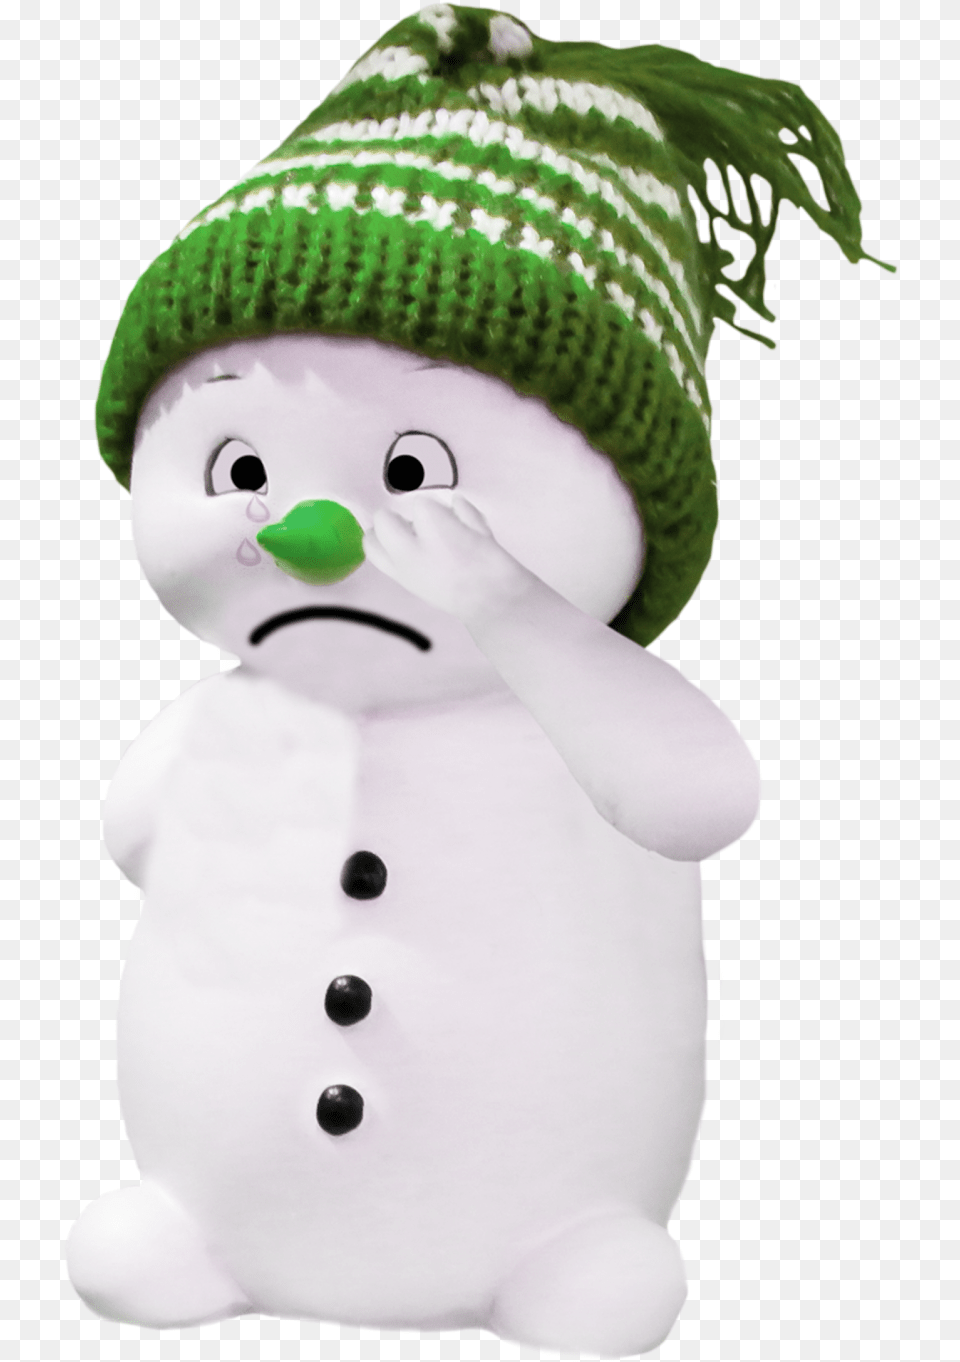 Snow Man Image Christmas Day, Cap, Outdoors, Nature, Hat Png